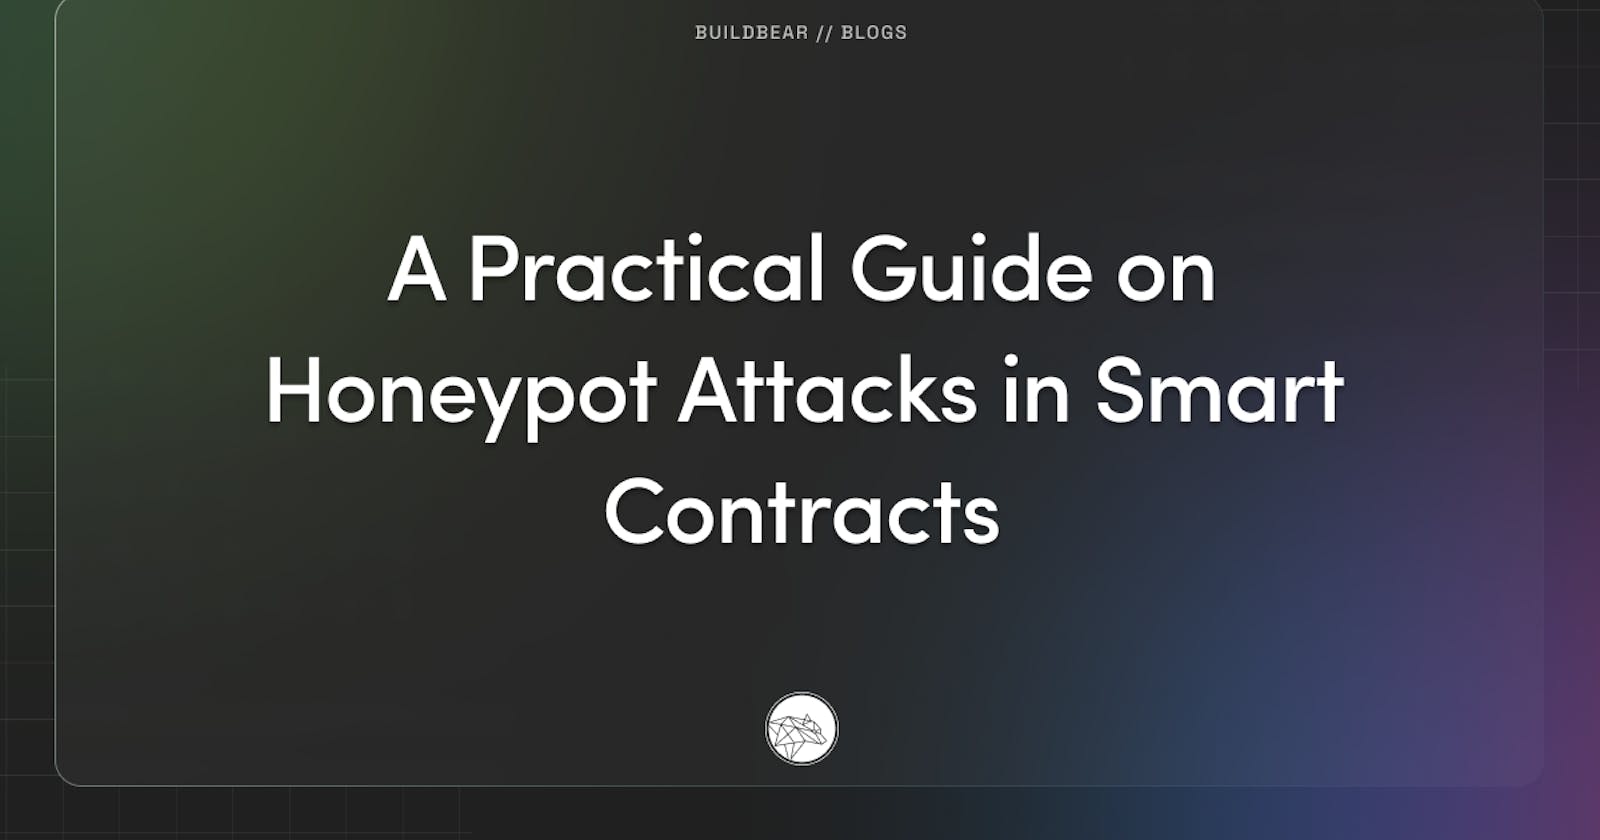 A Practical Guide on Honeypot Attacks in Smart Contracts